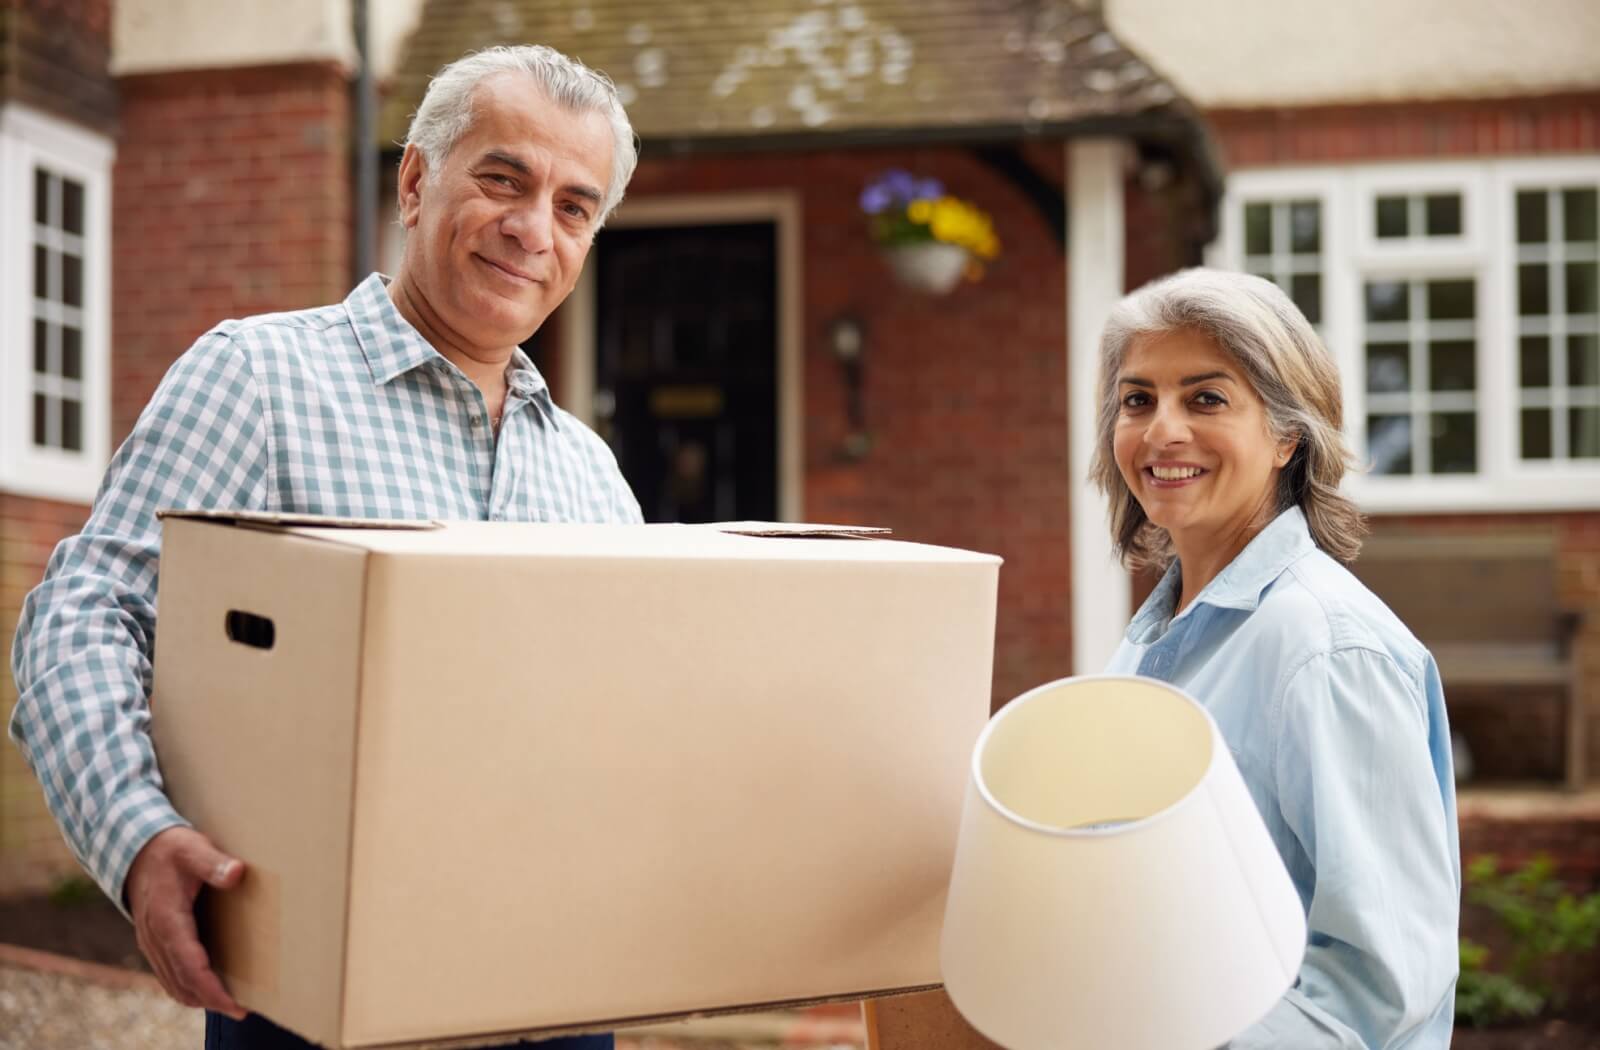 An older adult couple carrying a box and a lamp as a part of their downsizing efforts.